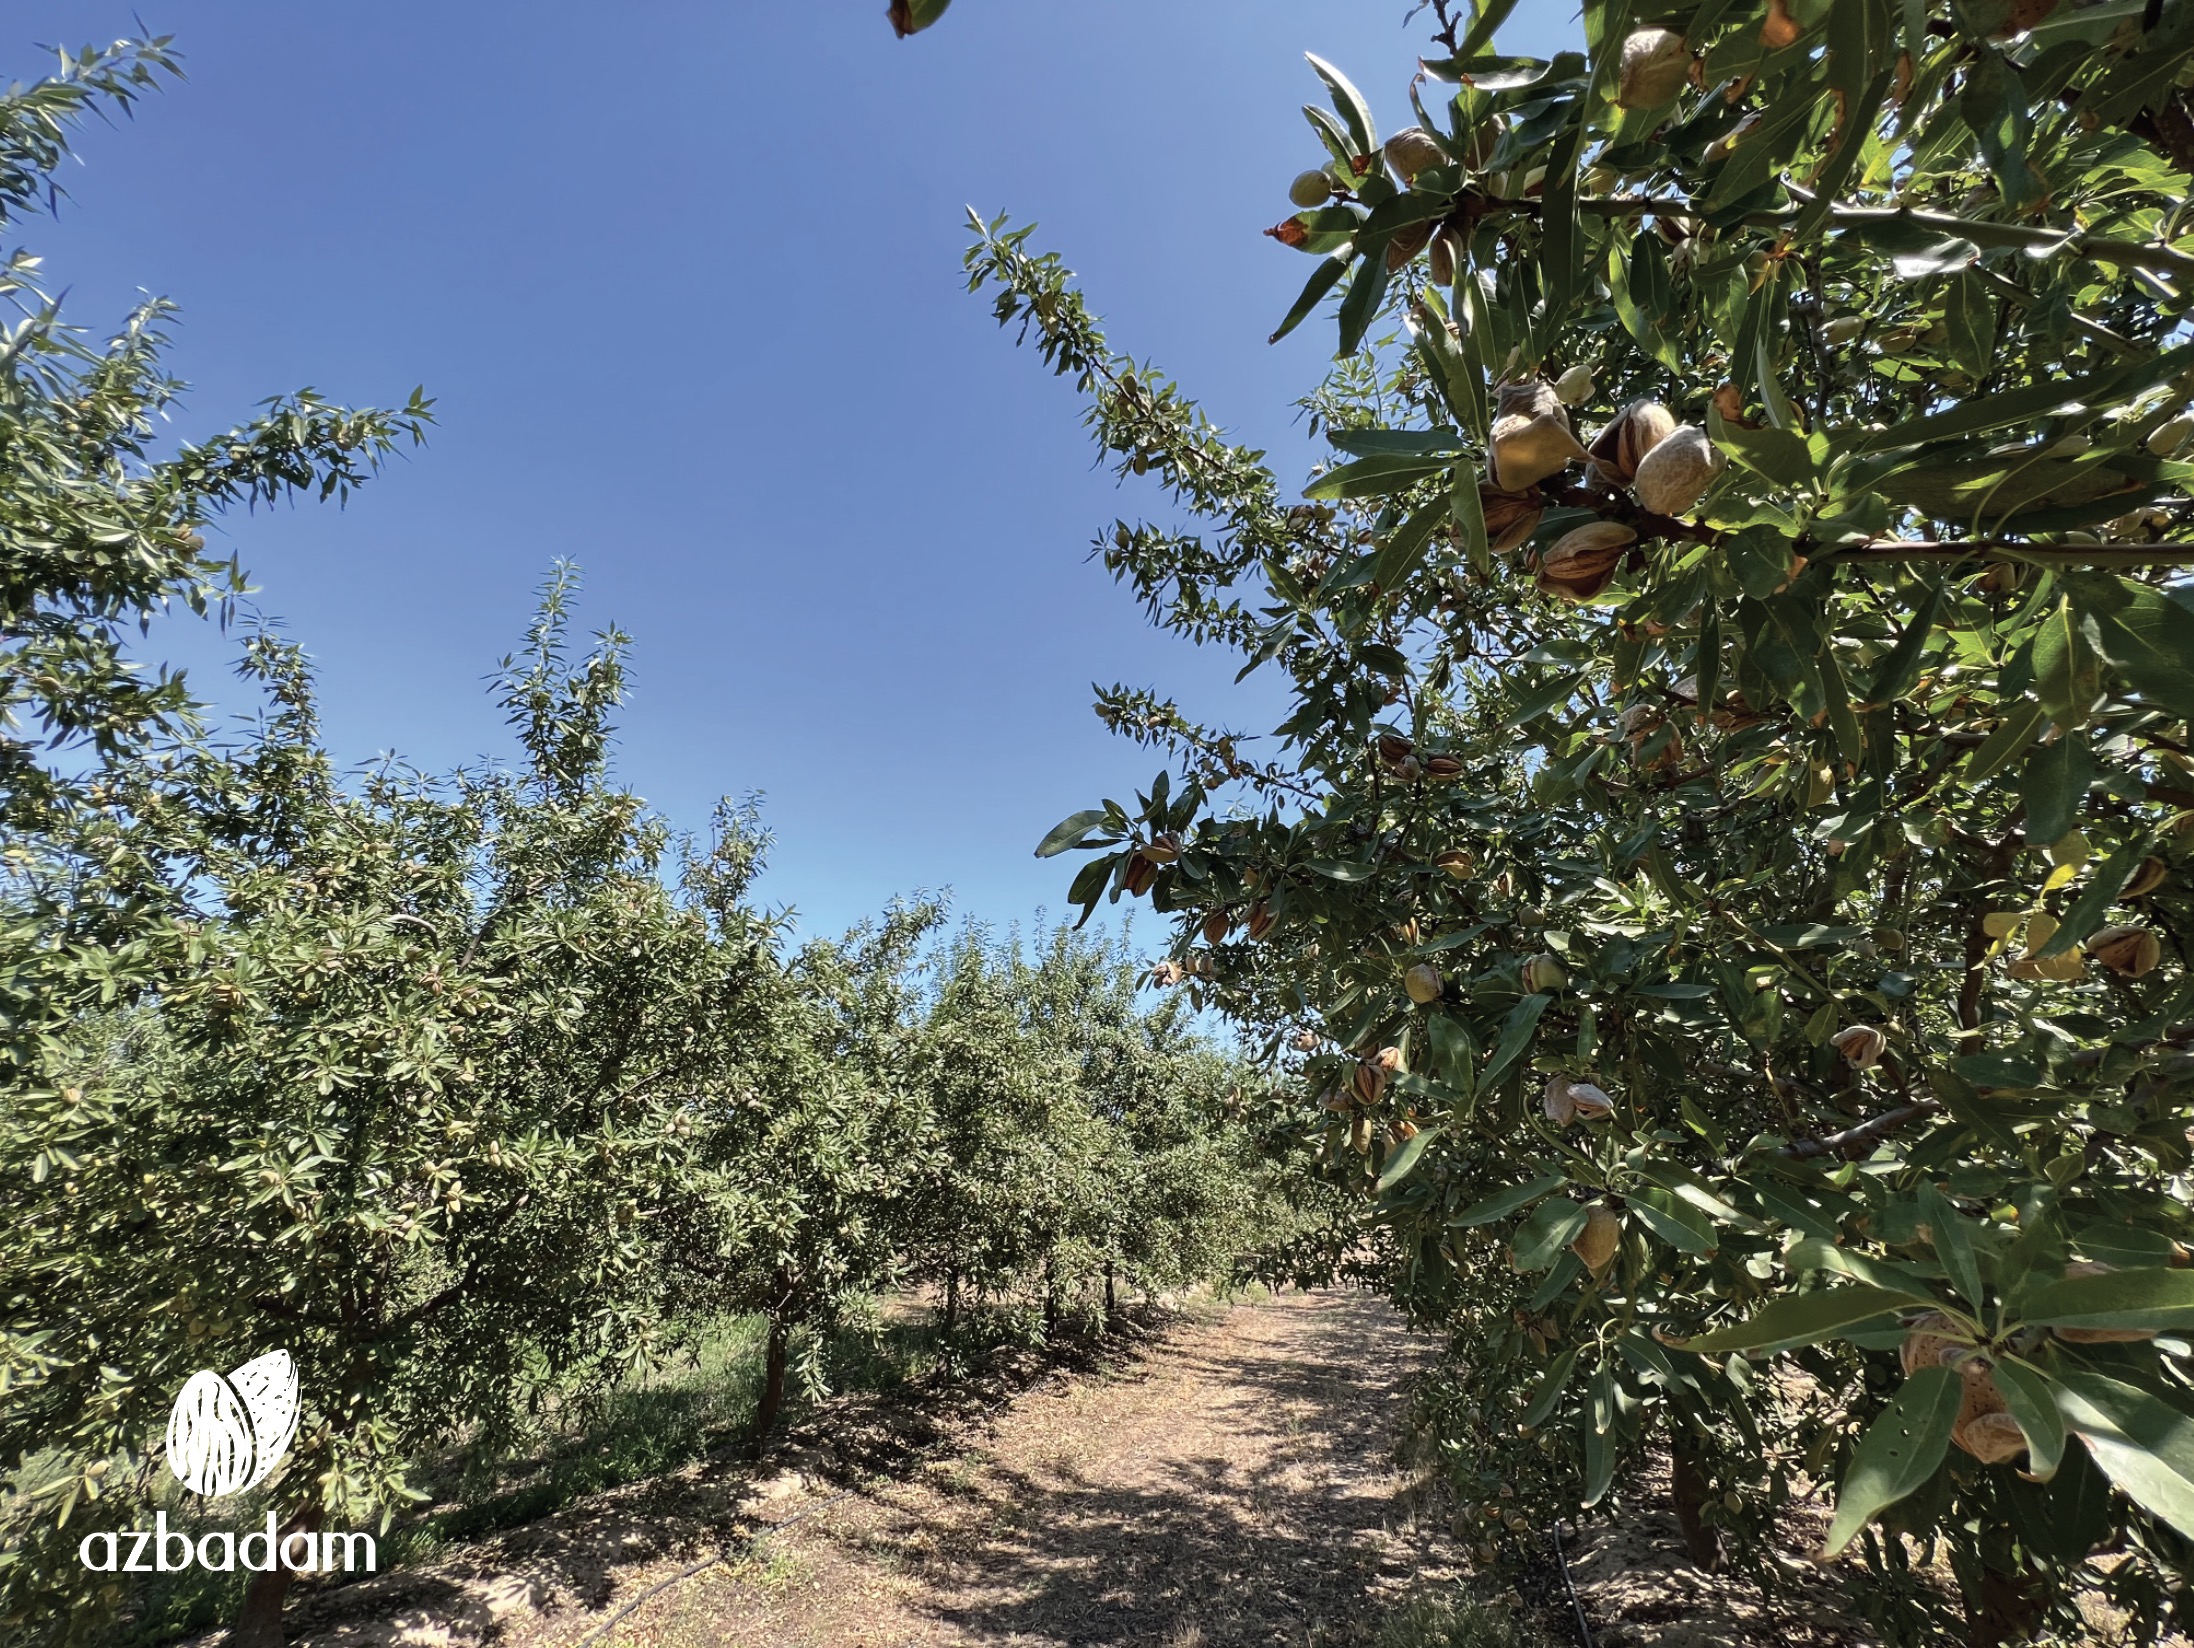 Almonds have already ripened in AZBADAM almond orchards!